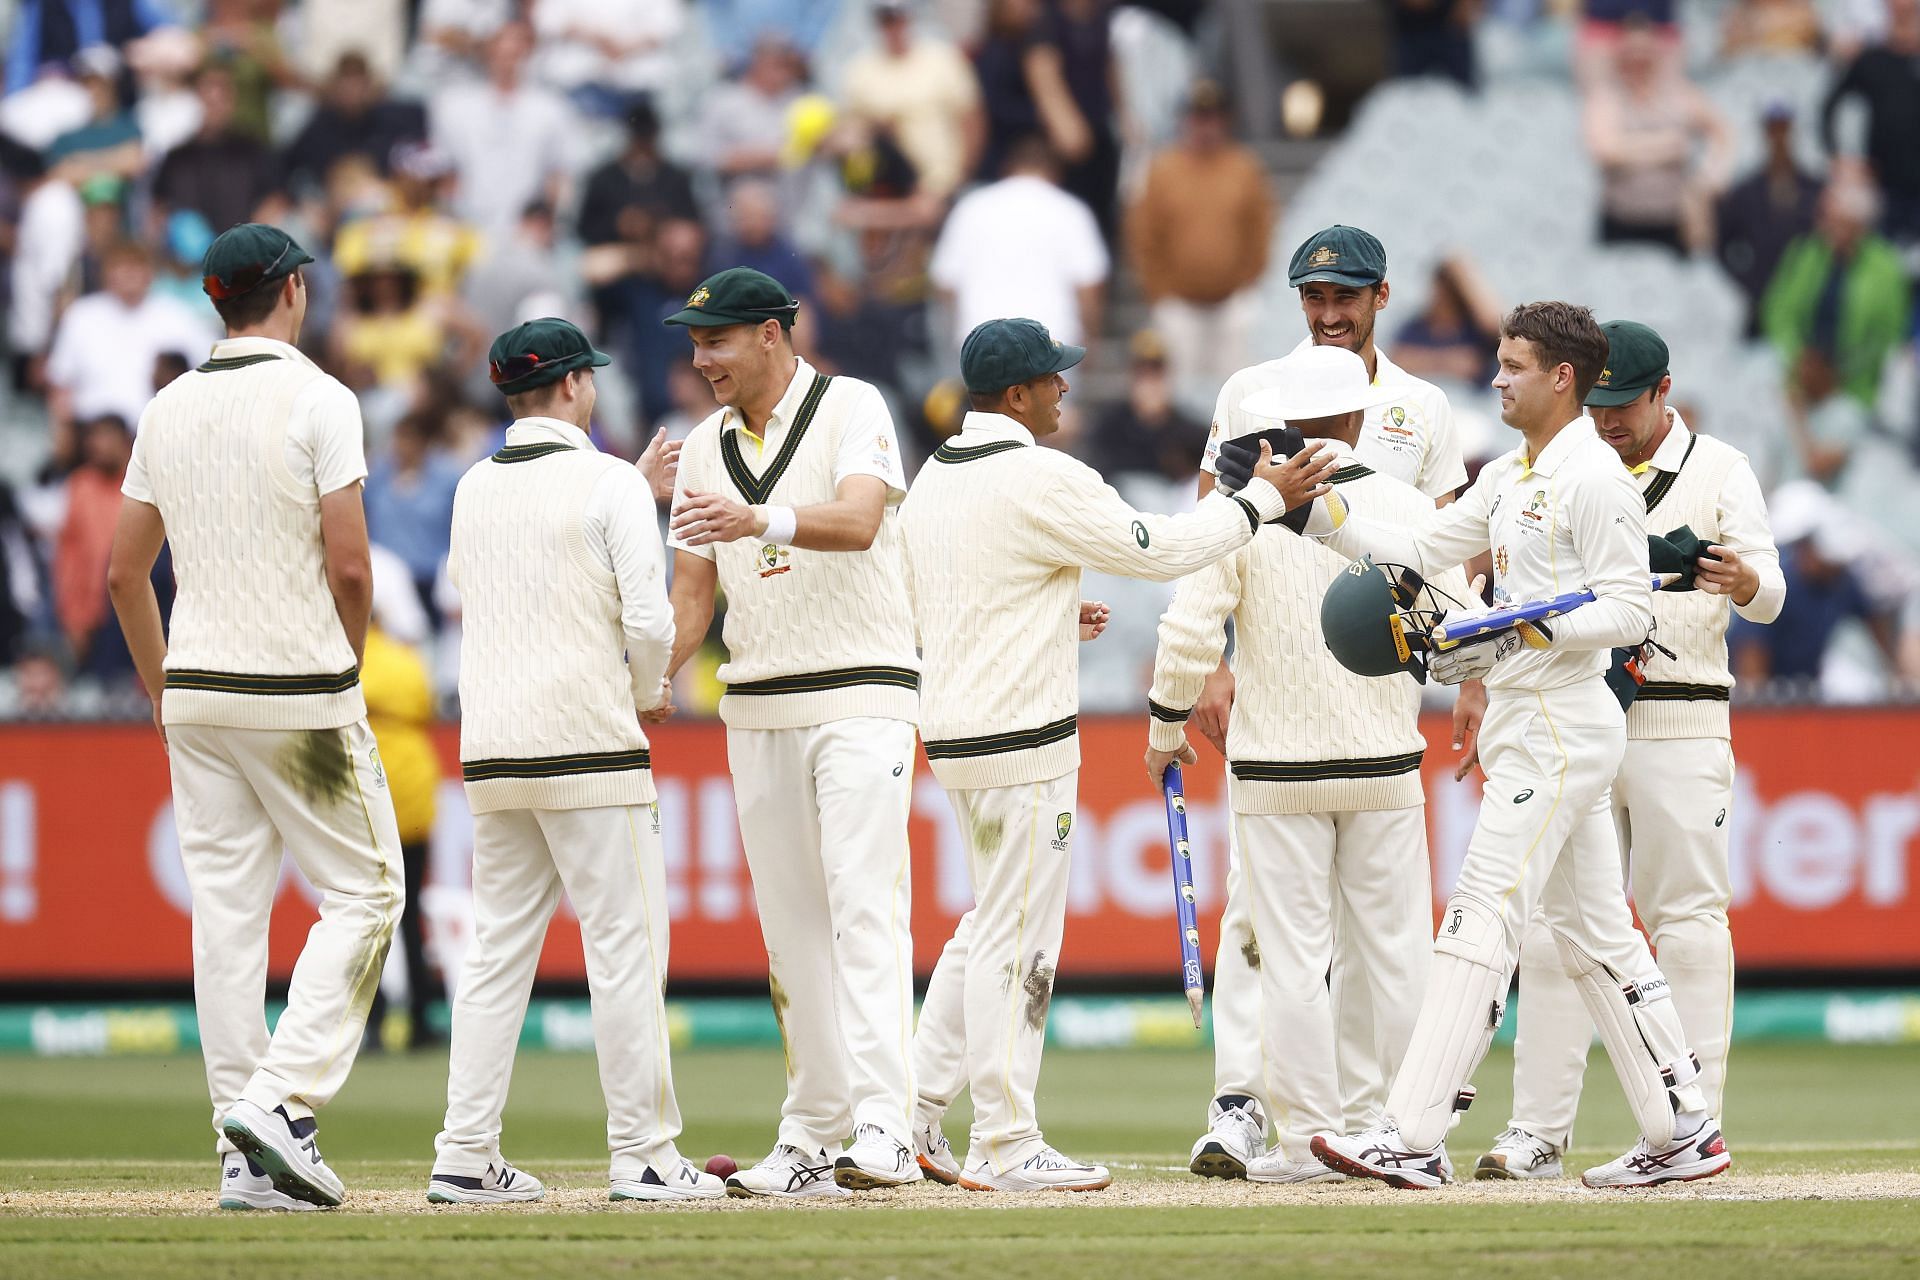 Australia v South Africa - Second Test: Day 4 (Image: Getty)